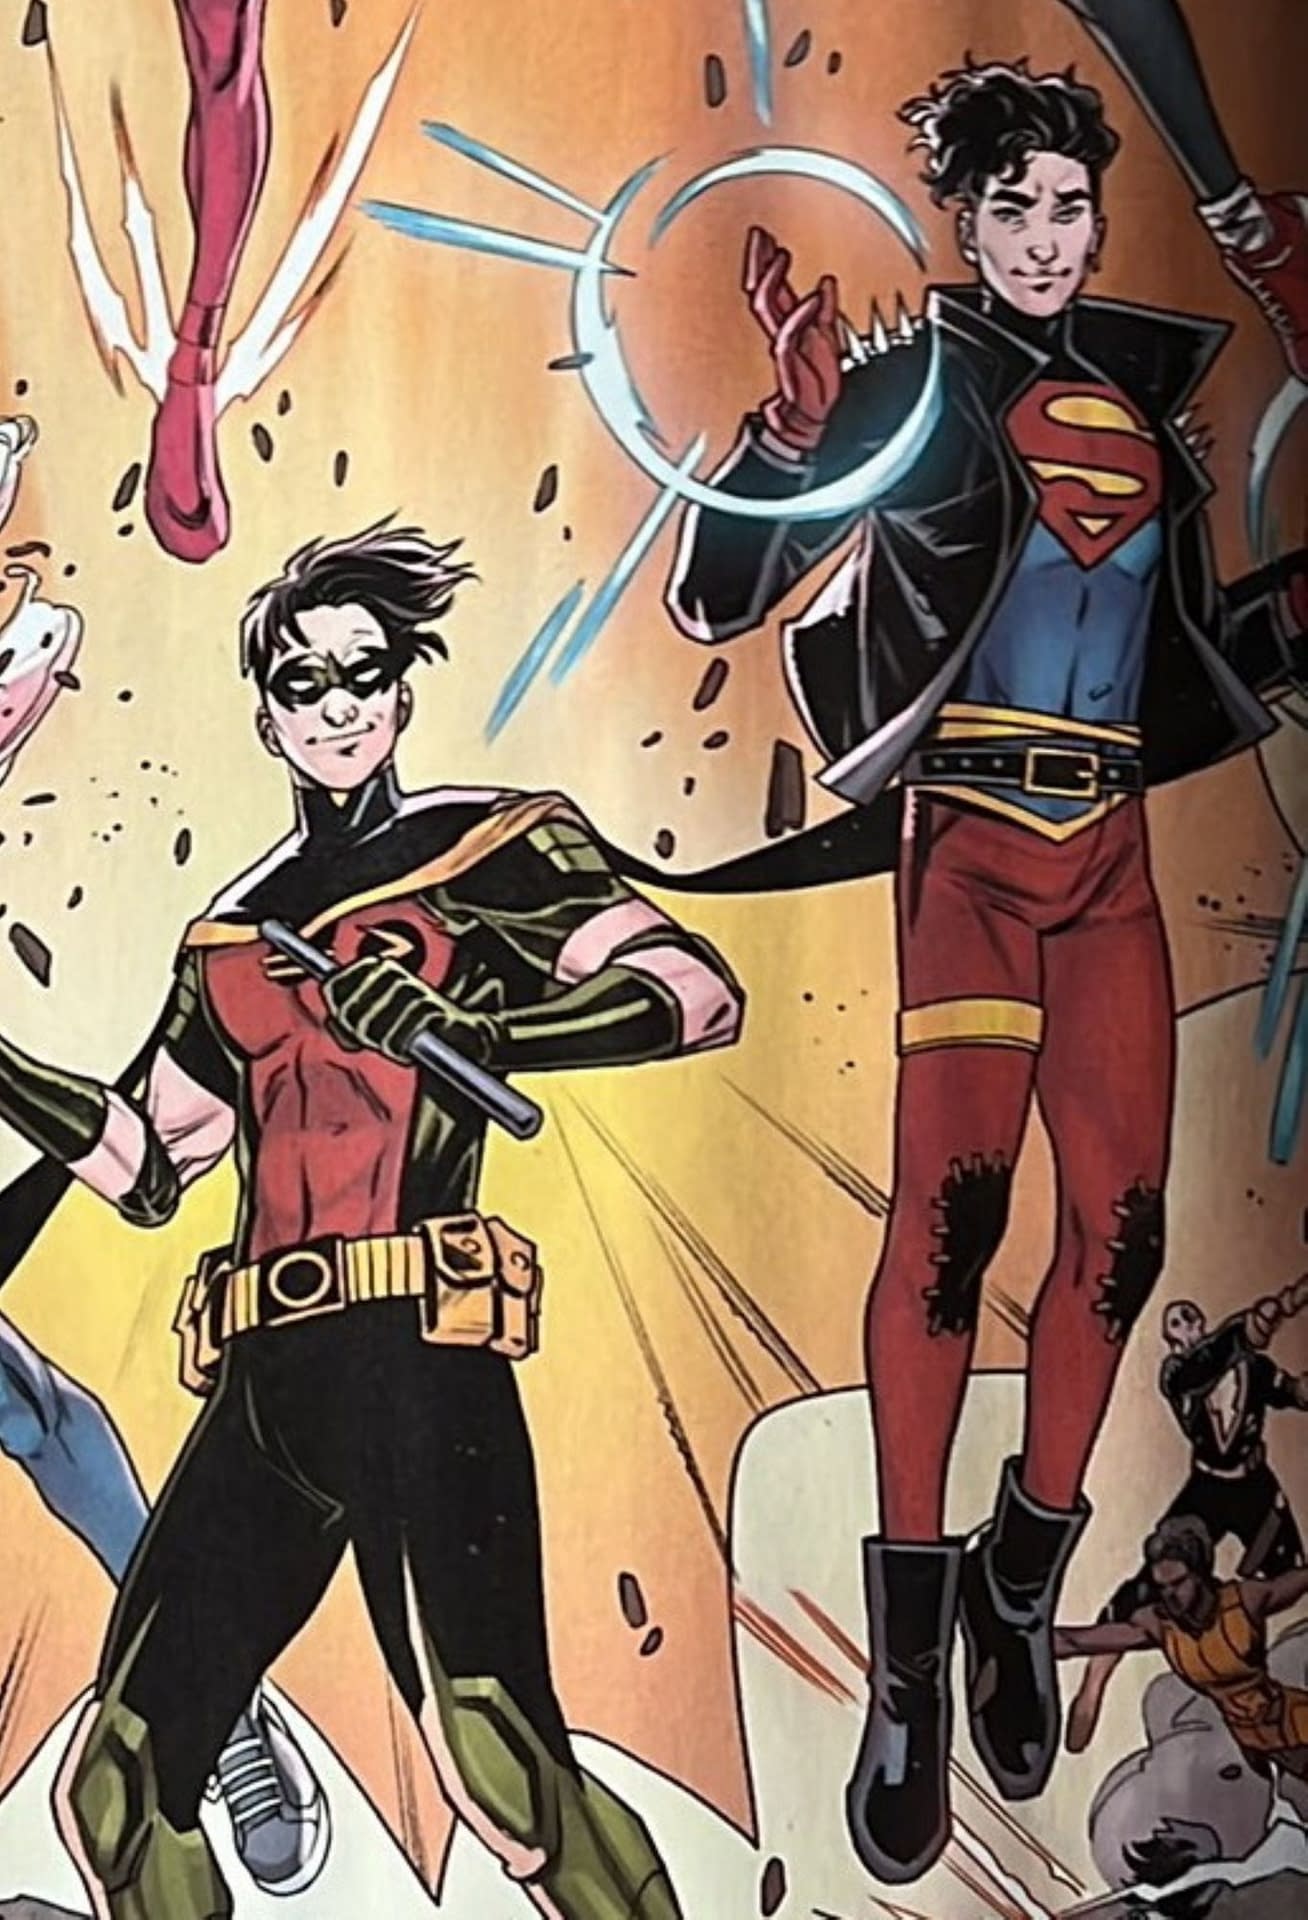 Tim Drake S Relationship With Conner Kent Explored Further At DC Comics